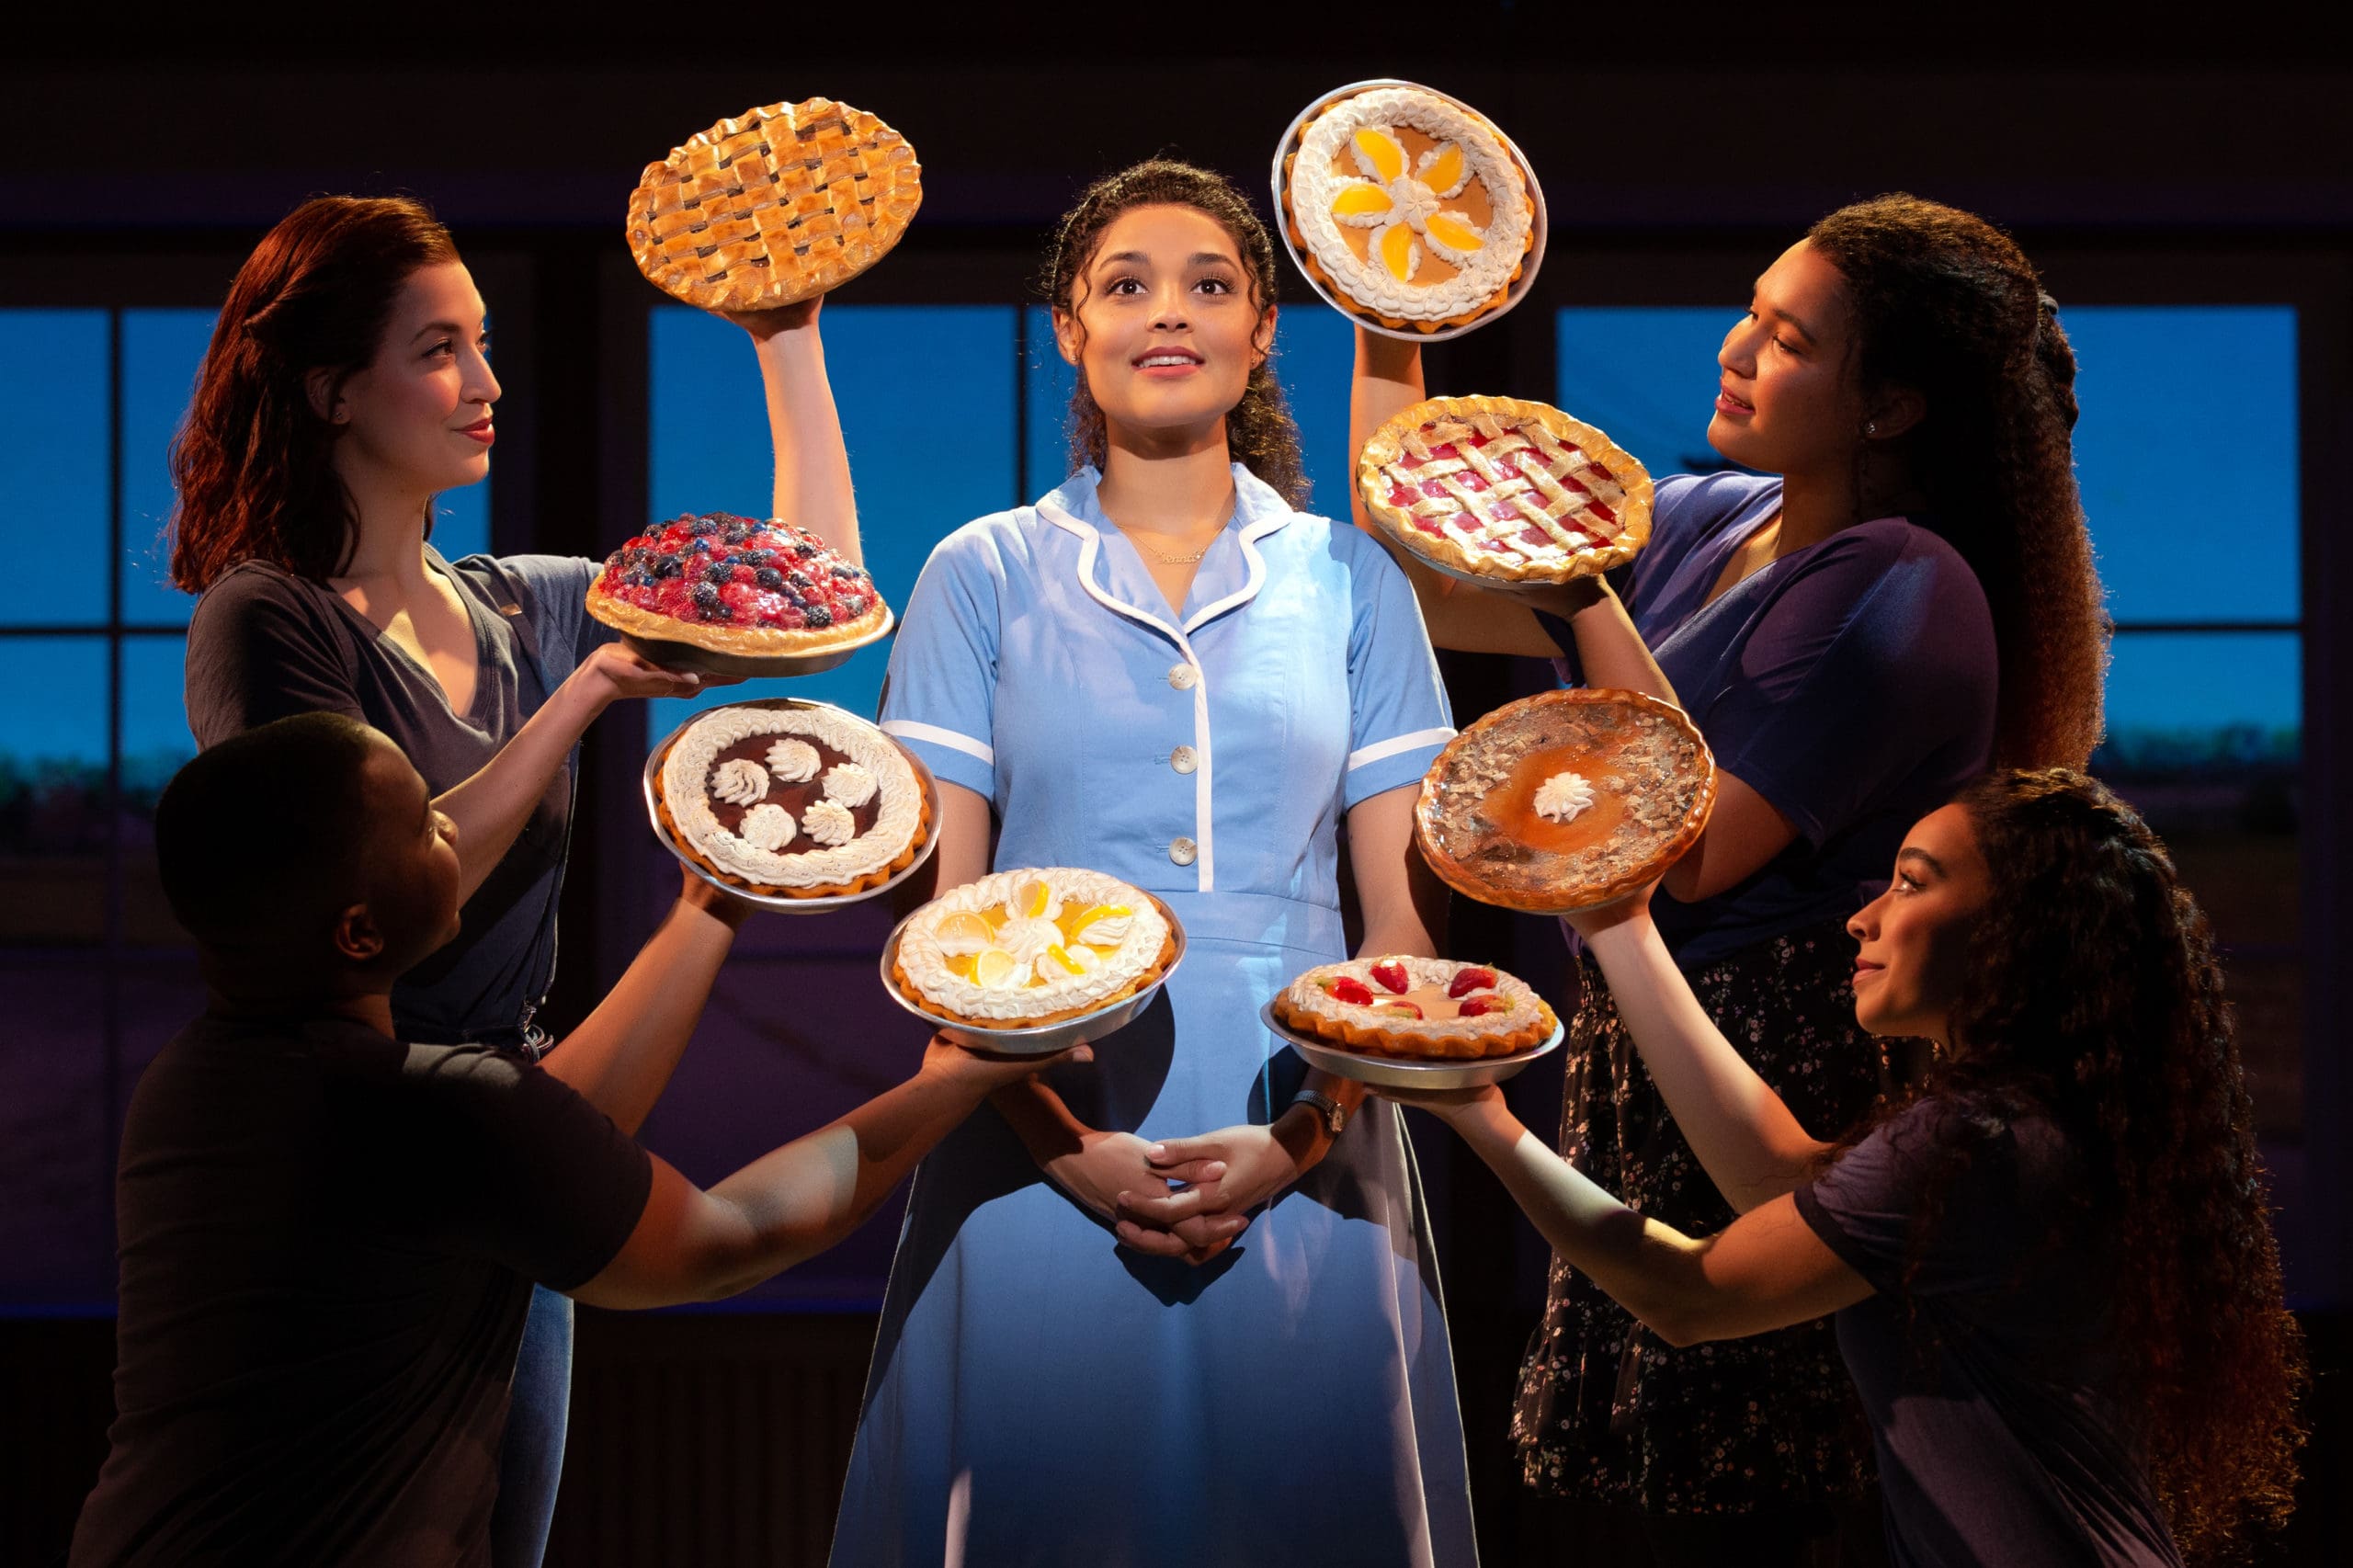 ‘Waitress’ to hit Playhouse with new lead actress, seats – but no pie